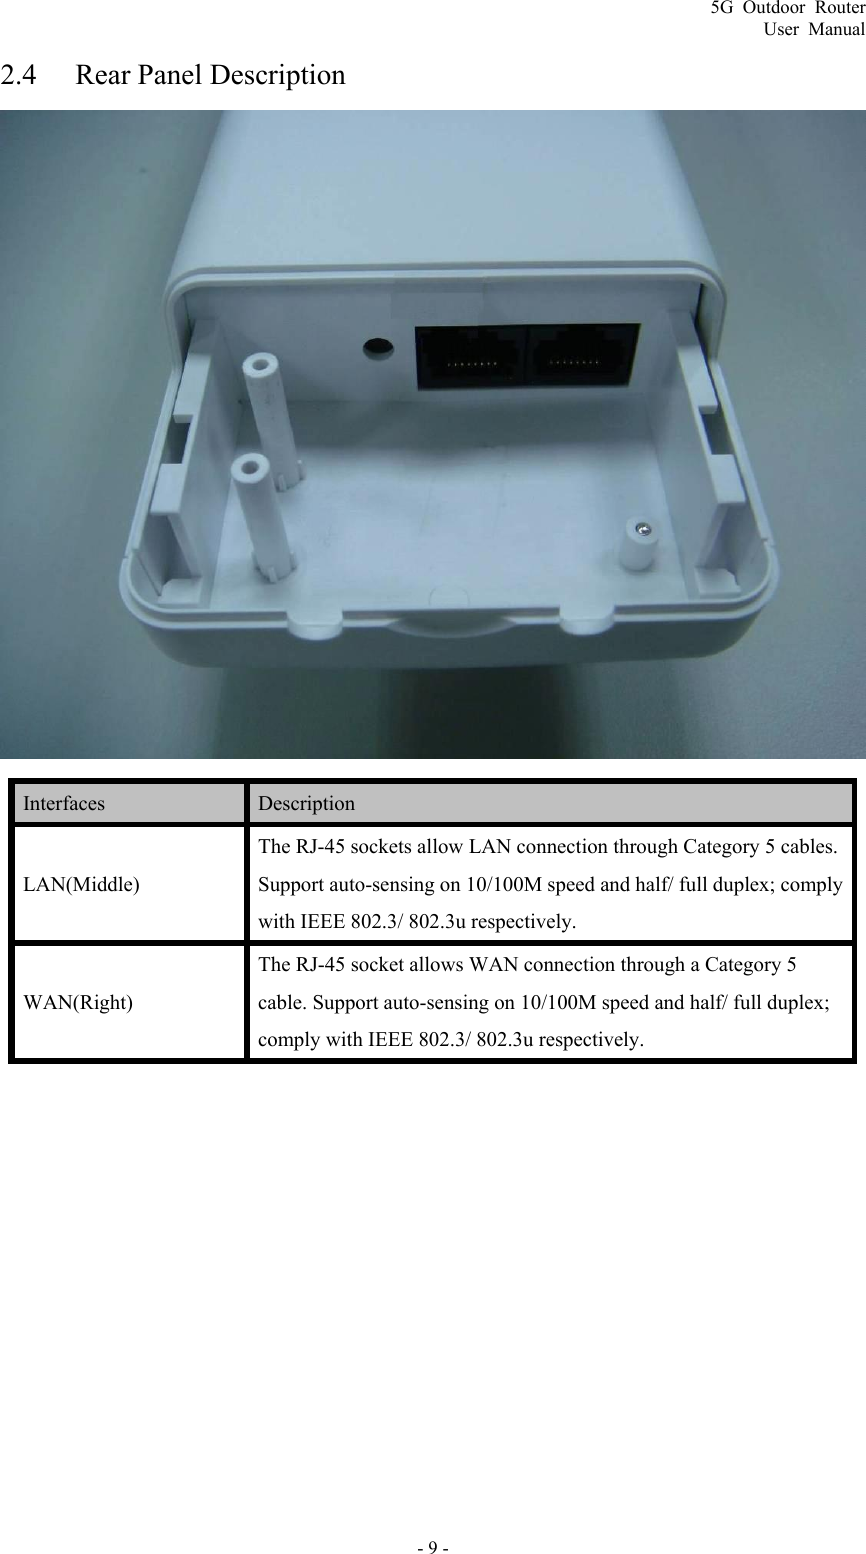 5G Outdoor Router User Manual - 9 - 2.4 Rear Panel Description  Interfaces   Description  LAN(Middle)  The RJ-45 sockets allow LAN connection through Category 5 cables. Support auto-sensing on 10/100M speed and half/ full duplex; comply with IEEE 802.3/ 802.3u respectively.   WAN(Right) The RJ-45 socket allows WAN connection through a Category 5 cable. Support auto-sensing on 10/100M speed and half/ full duplex; comply with IEEE 802.3/ 802.3u respectively. 